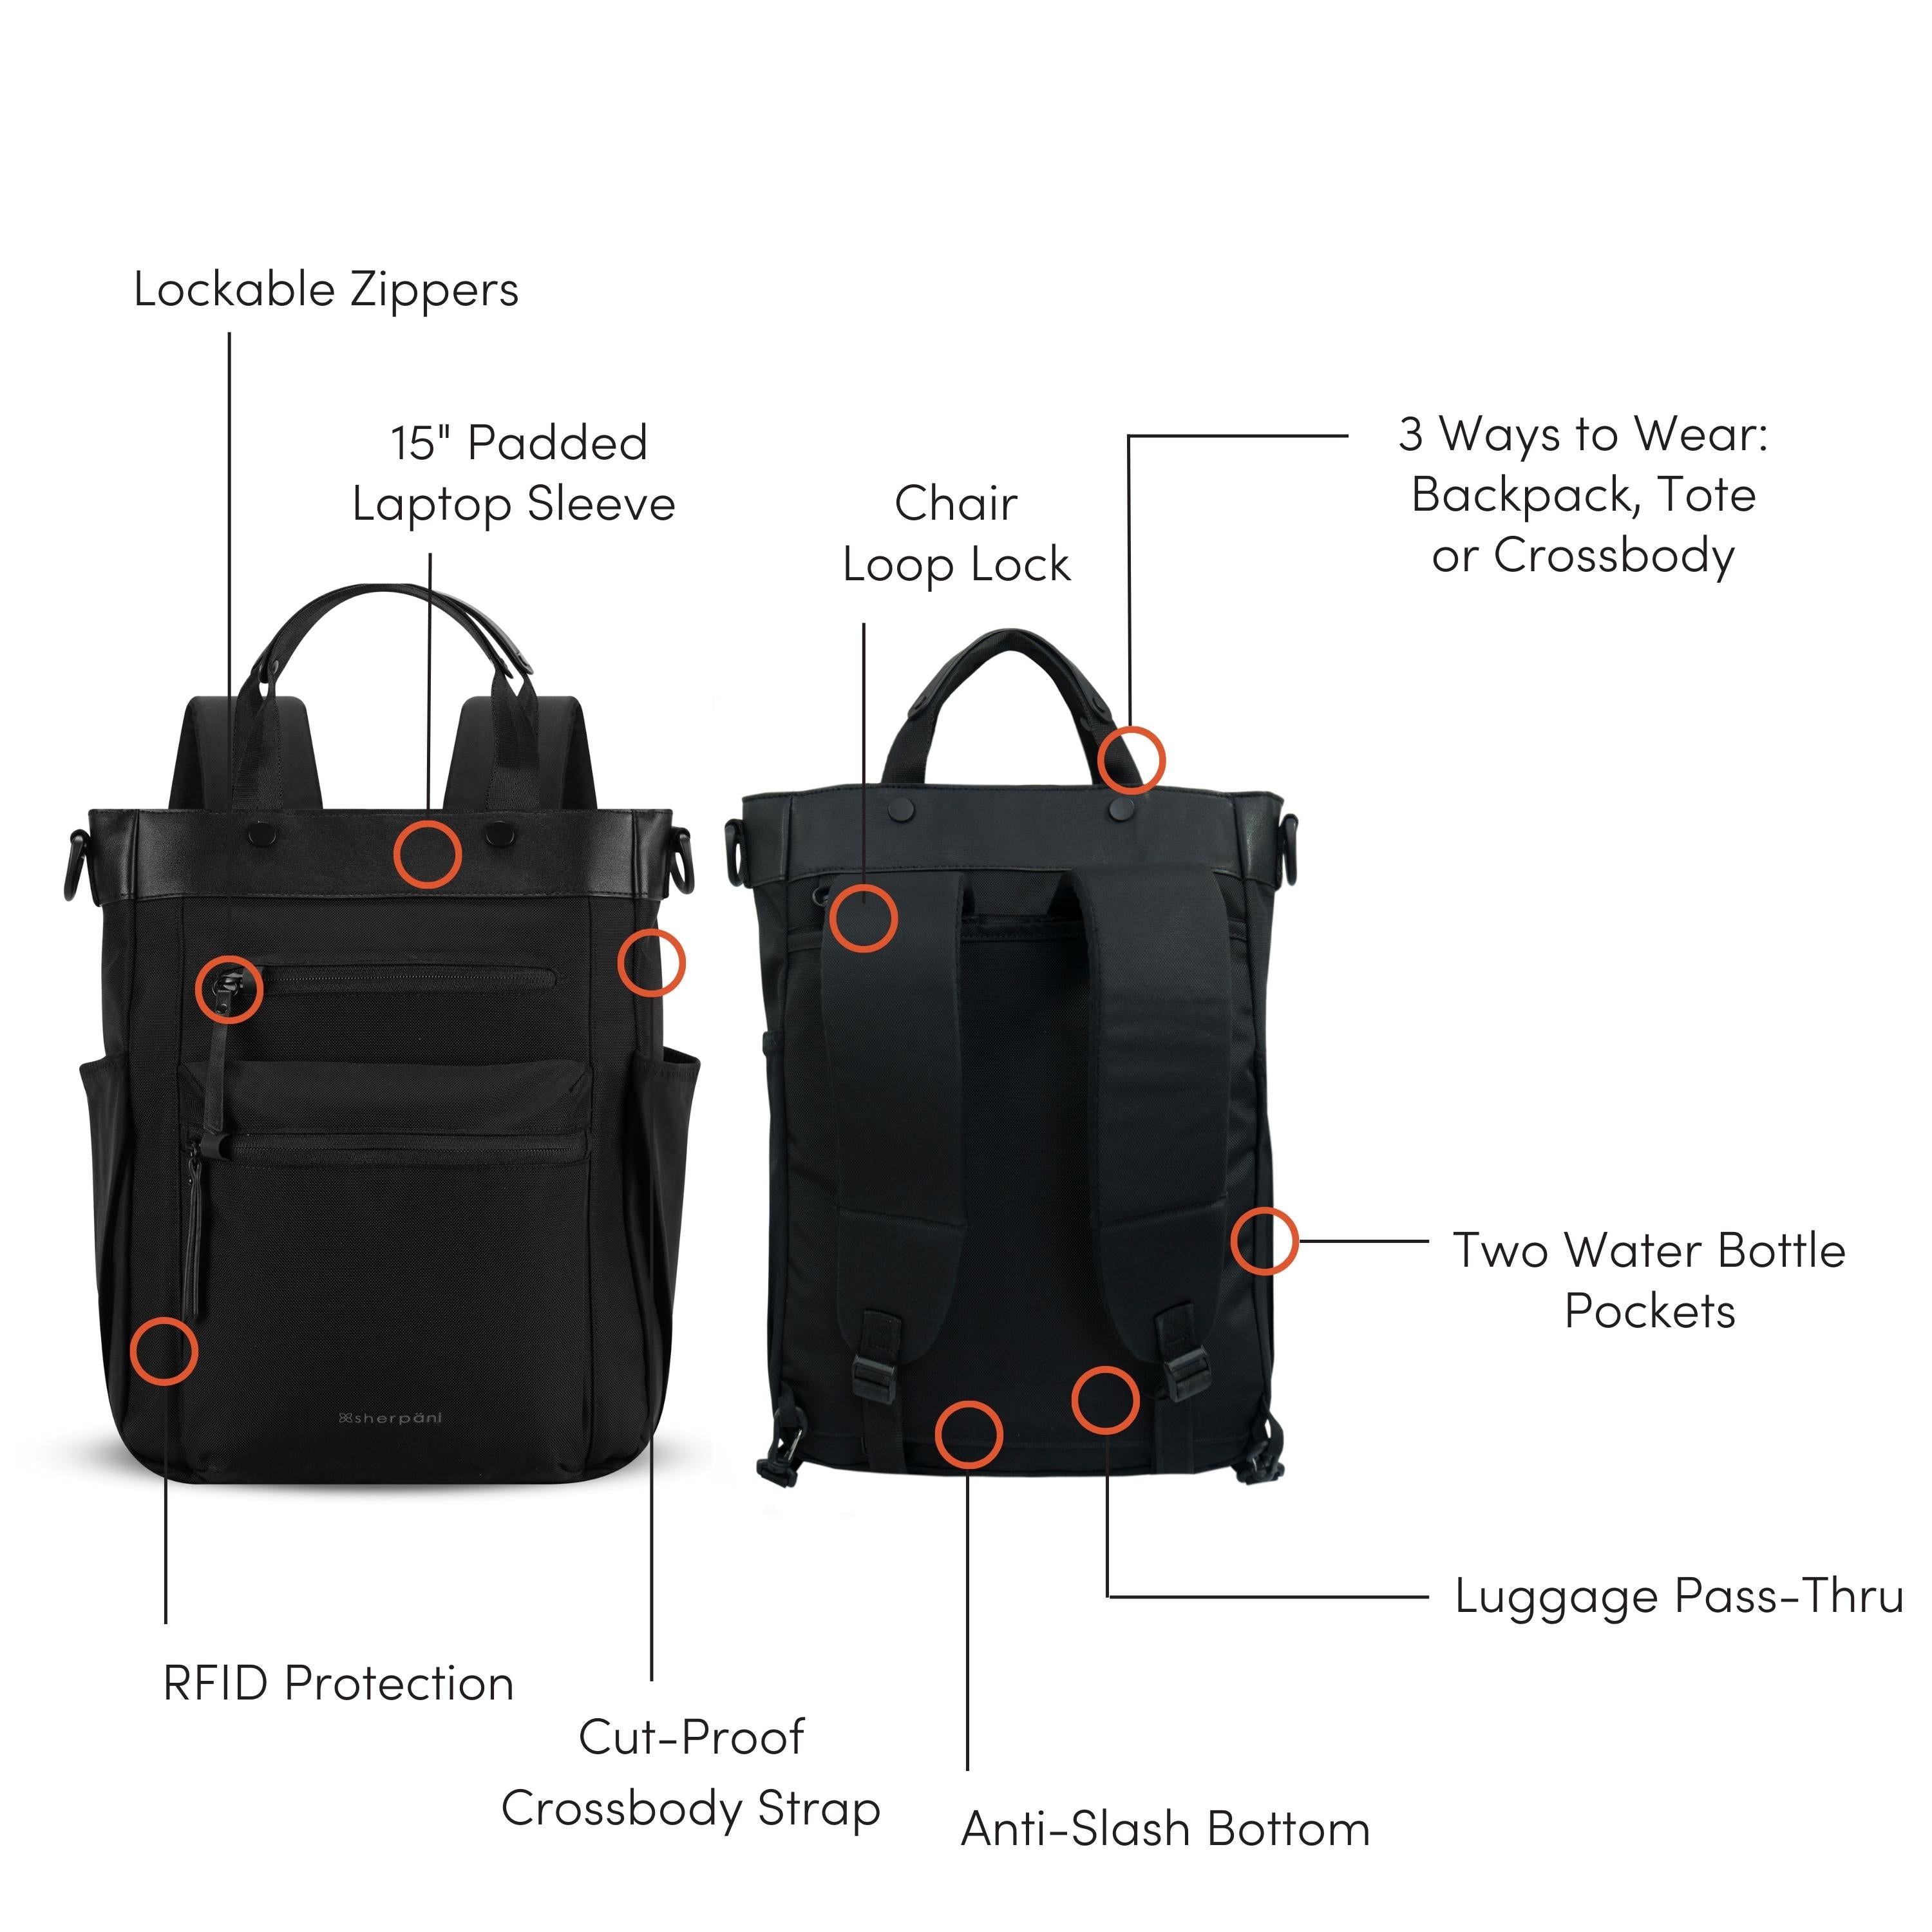 Graphic showcasing the features of Sherpani’s Anti Theft bag, the Soleil AT in Carbon. There is a front and a back view of the bag, red circles highlight the following features: Lockable Zippers, 15” Padded Laptop Sleeve, Chair Loop Lock, 3 Ways to Wear: Backpack, Tote or Crossbody, Two Water Bottle Pockets, Luggage Pass-Thru, Anti-Slash Bottom, Cut-Proof Crossbody Strap, RFID Protection. 